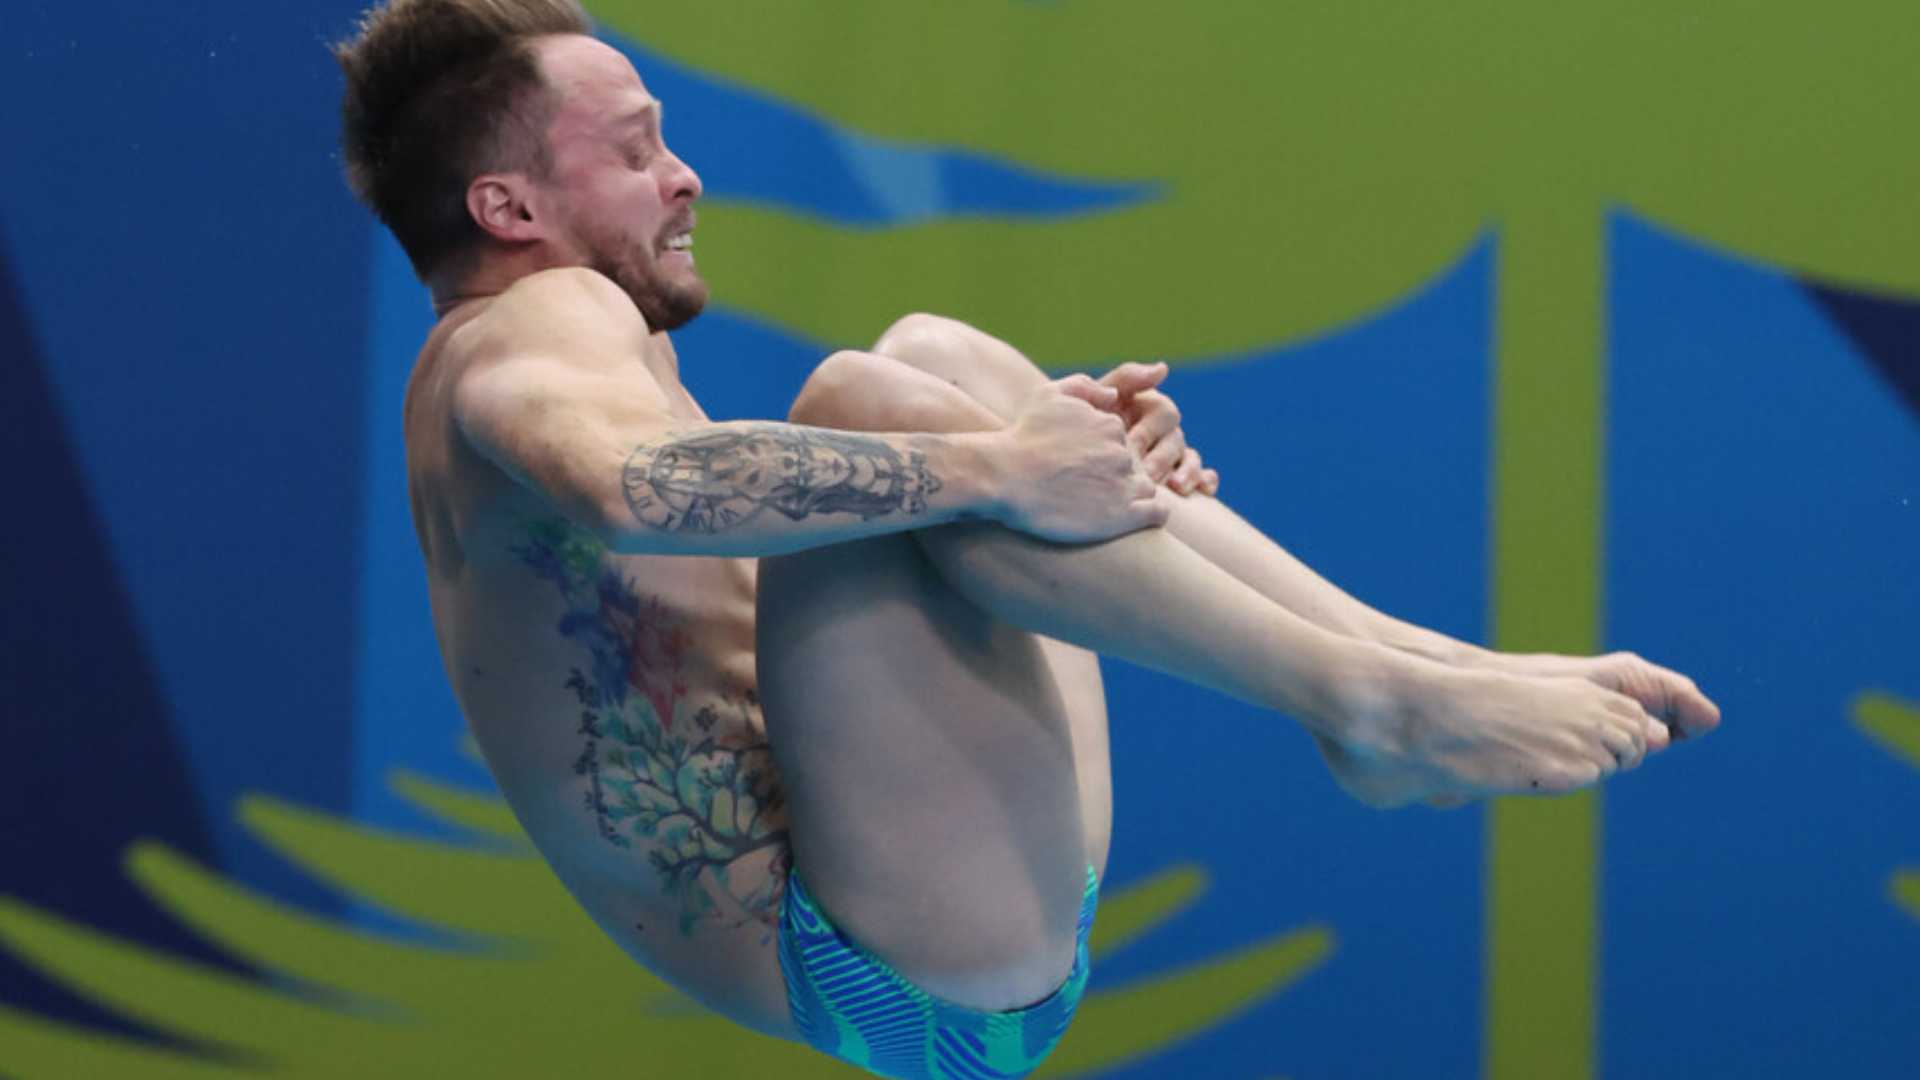 Chilean Neglia will seek the gold against the favorite Yost in the diving final